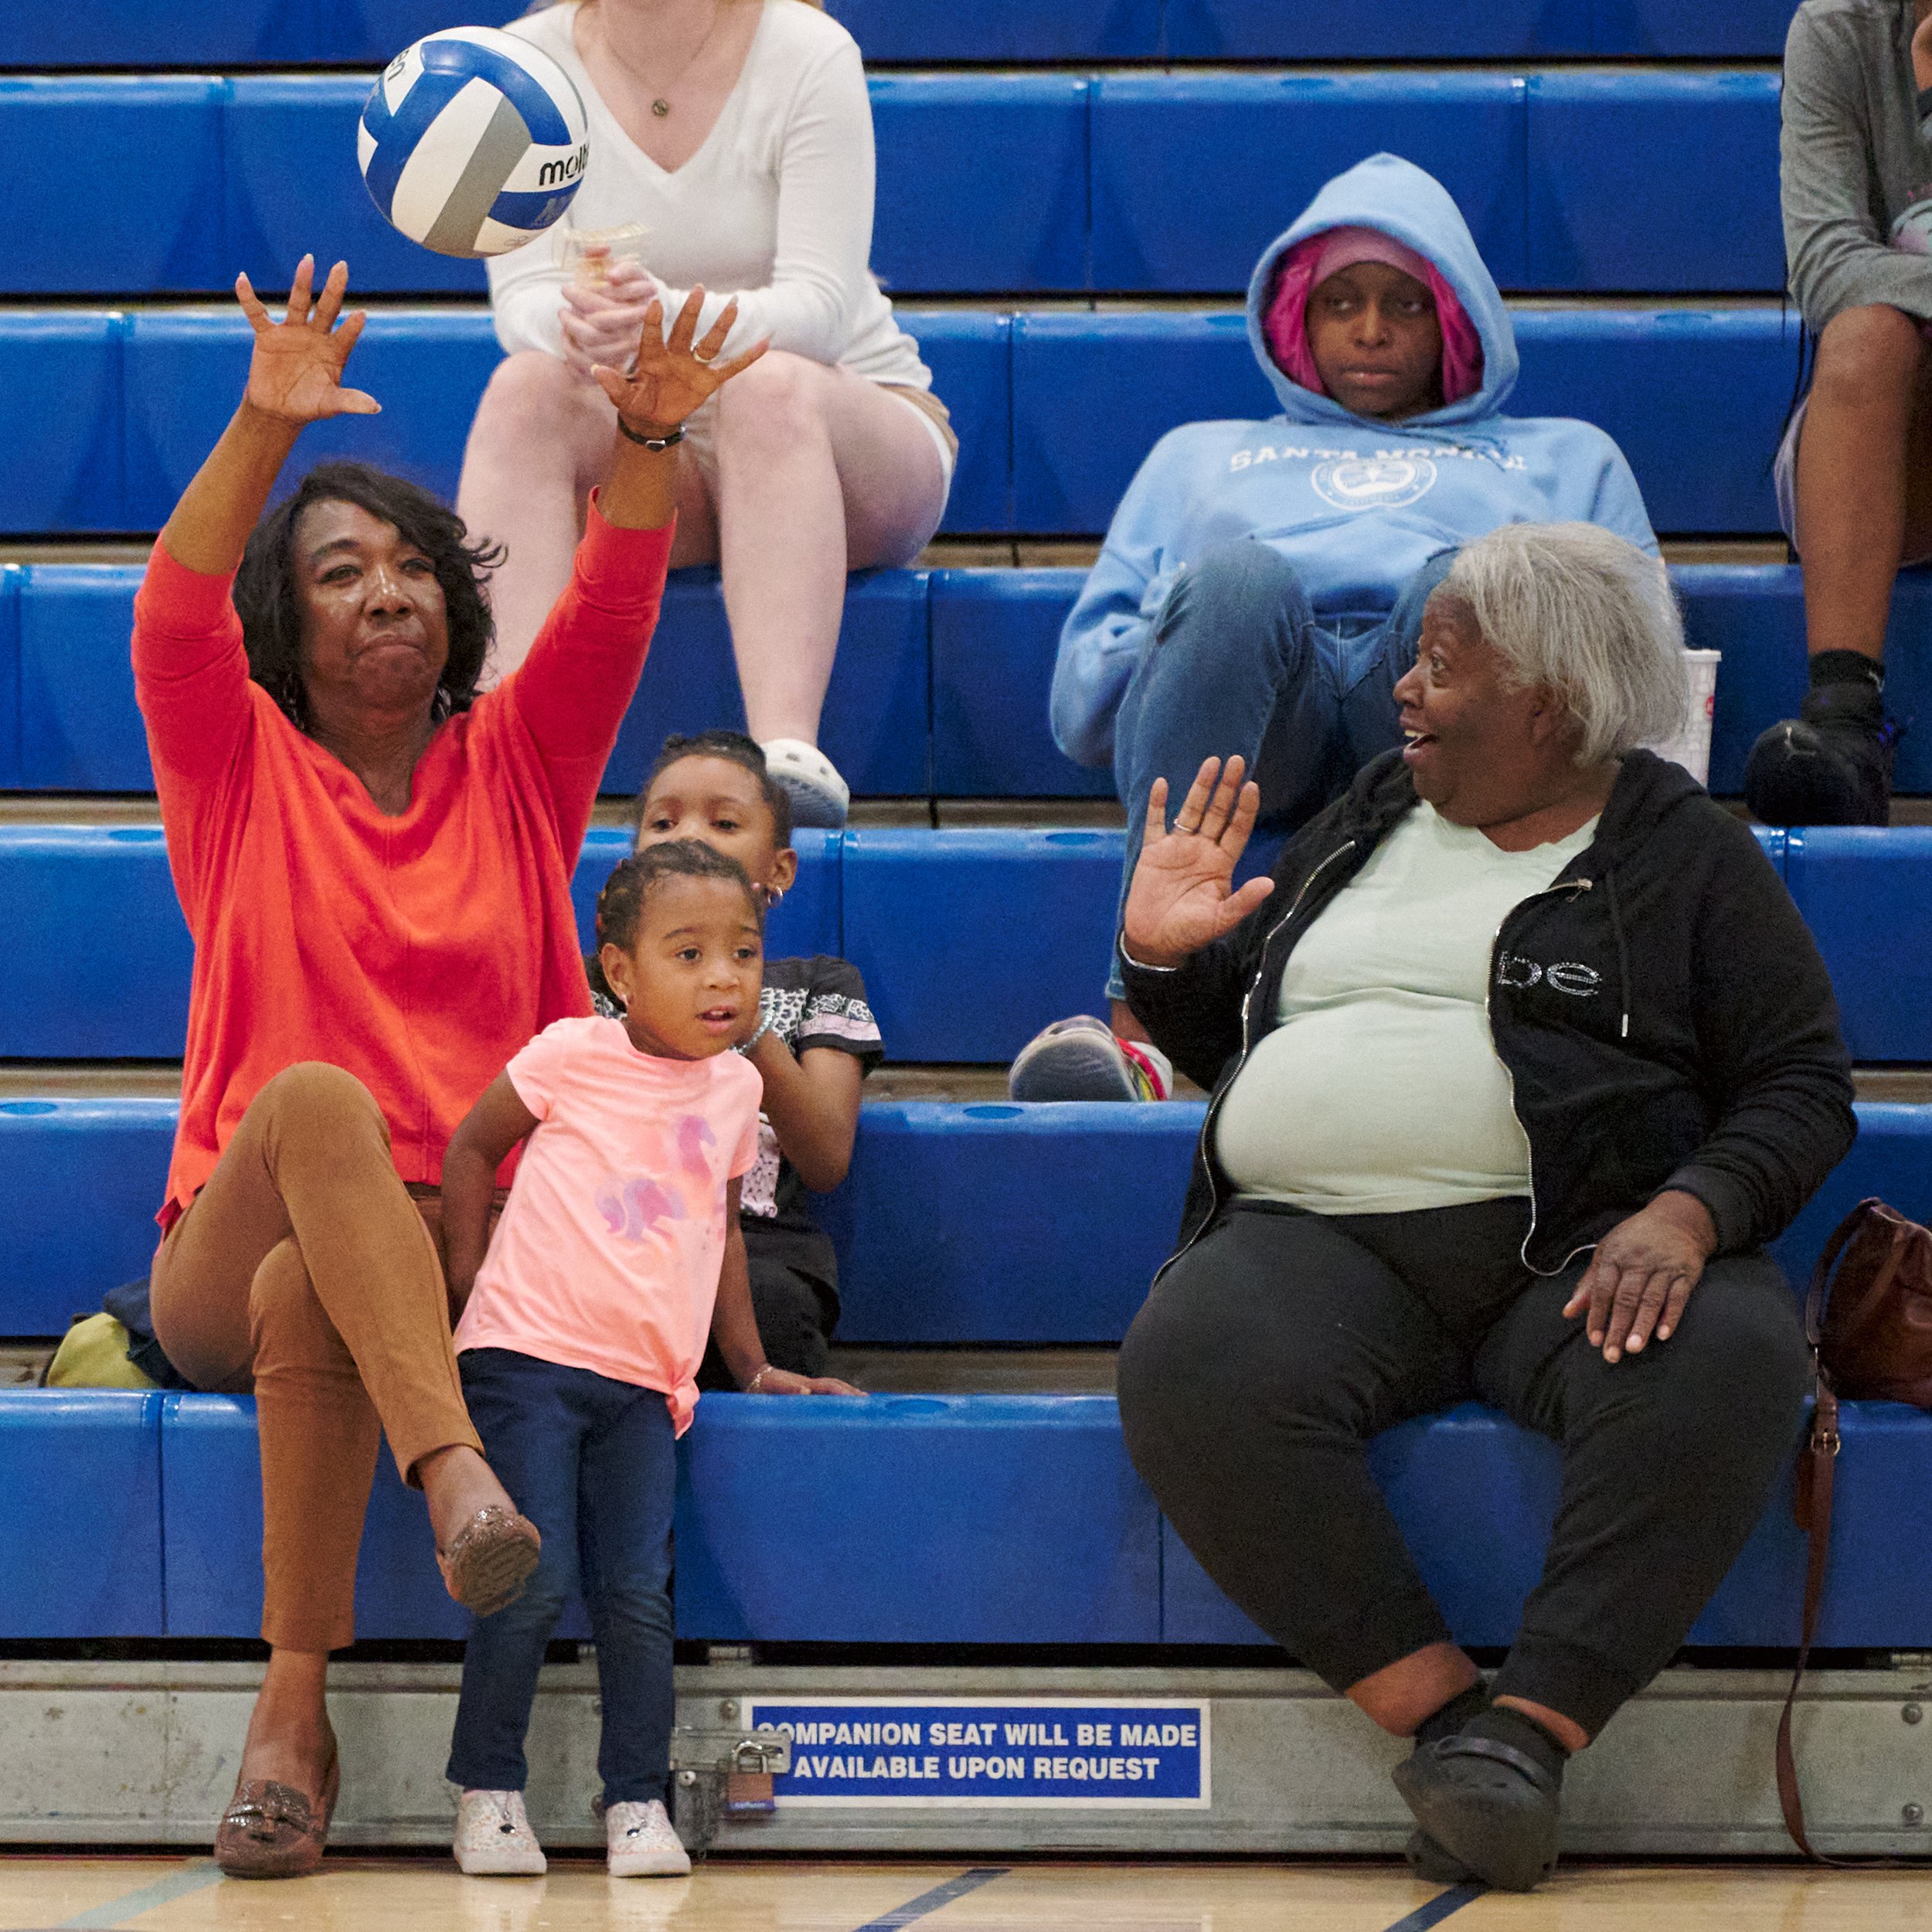  Daisy Smith, sitting with Aadya Goodman, Skylar Youngblood, and Annette Thompson, sends the ball back onto the court during the women's volleyball match between the Santa Monica College Corsairs and the Antelope Valley College Marauders on Wednesday